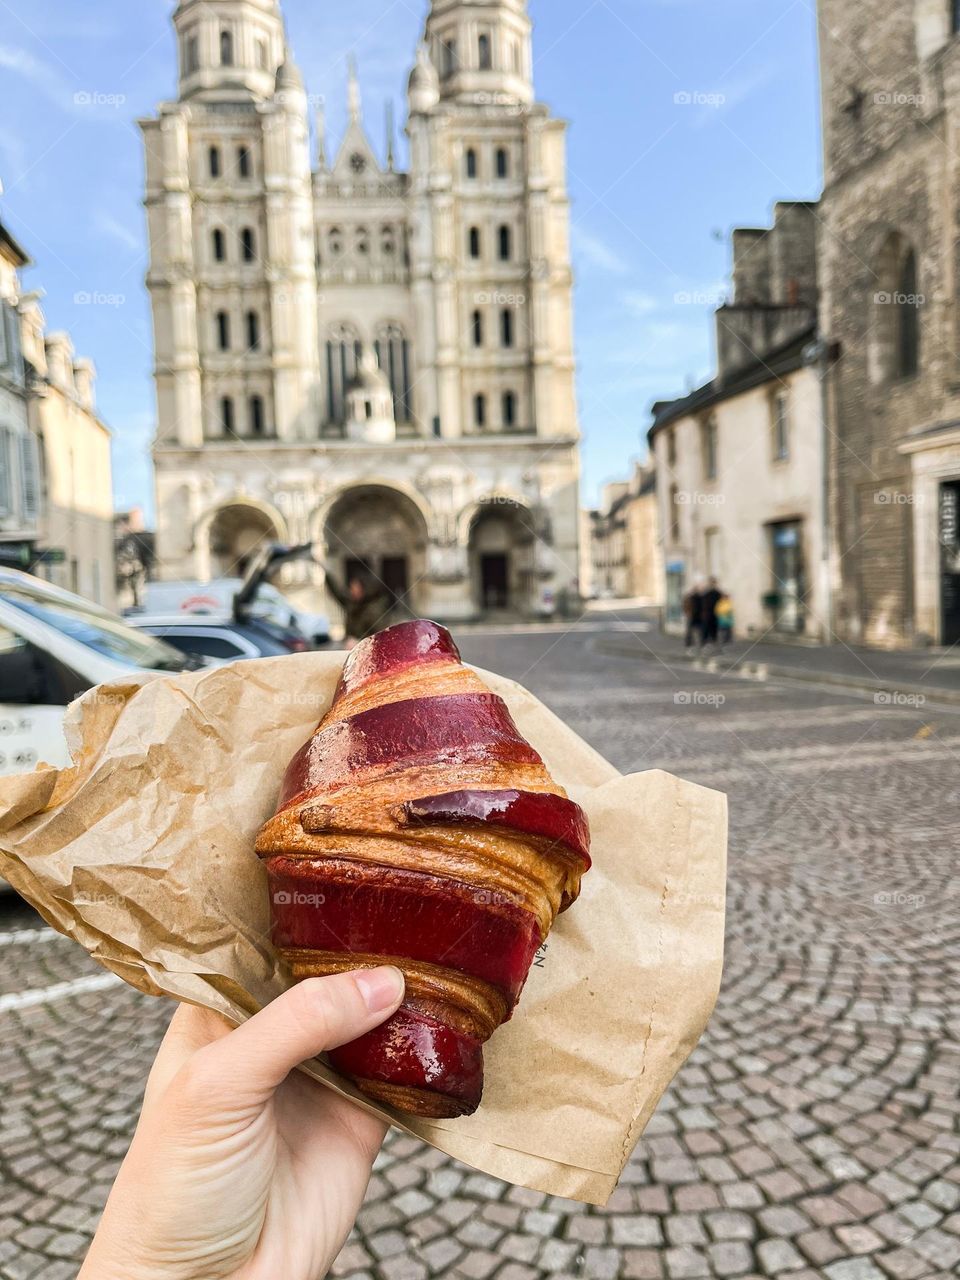 A delicious fresh croissant on the streets of Dijon France.